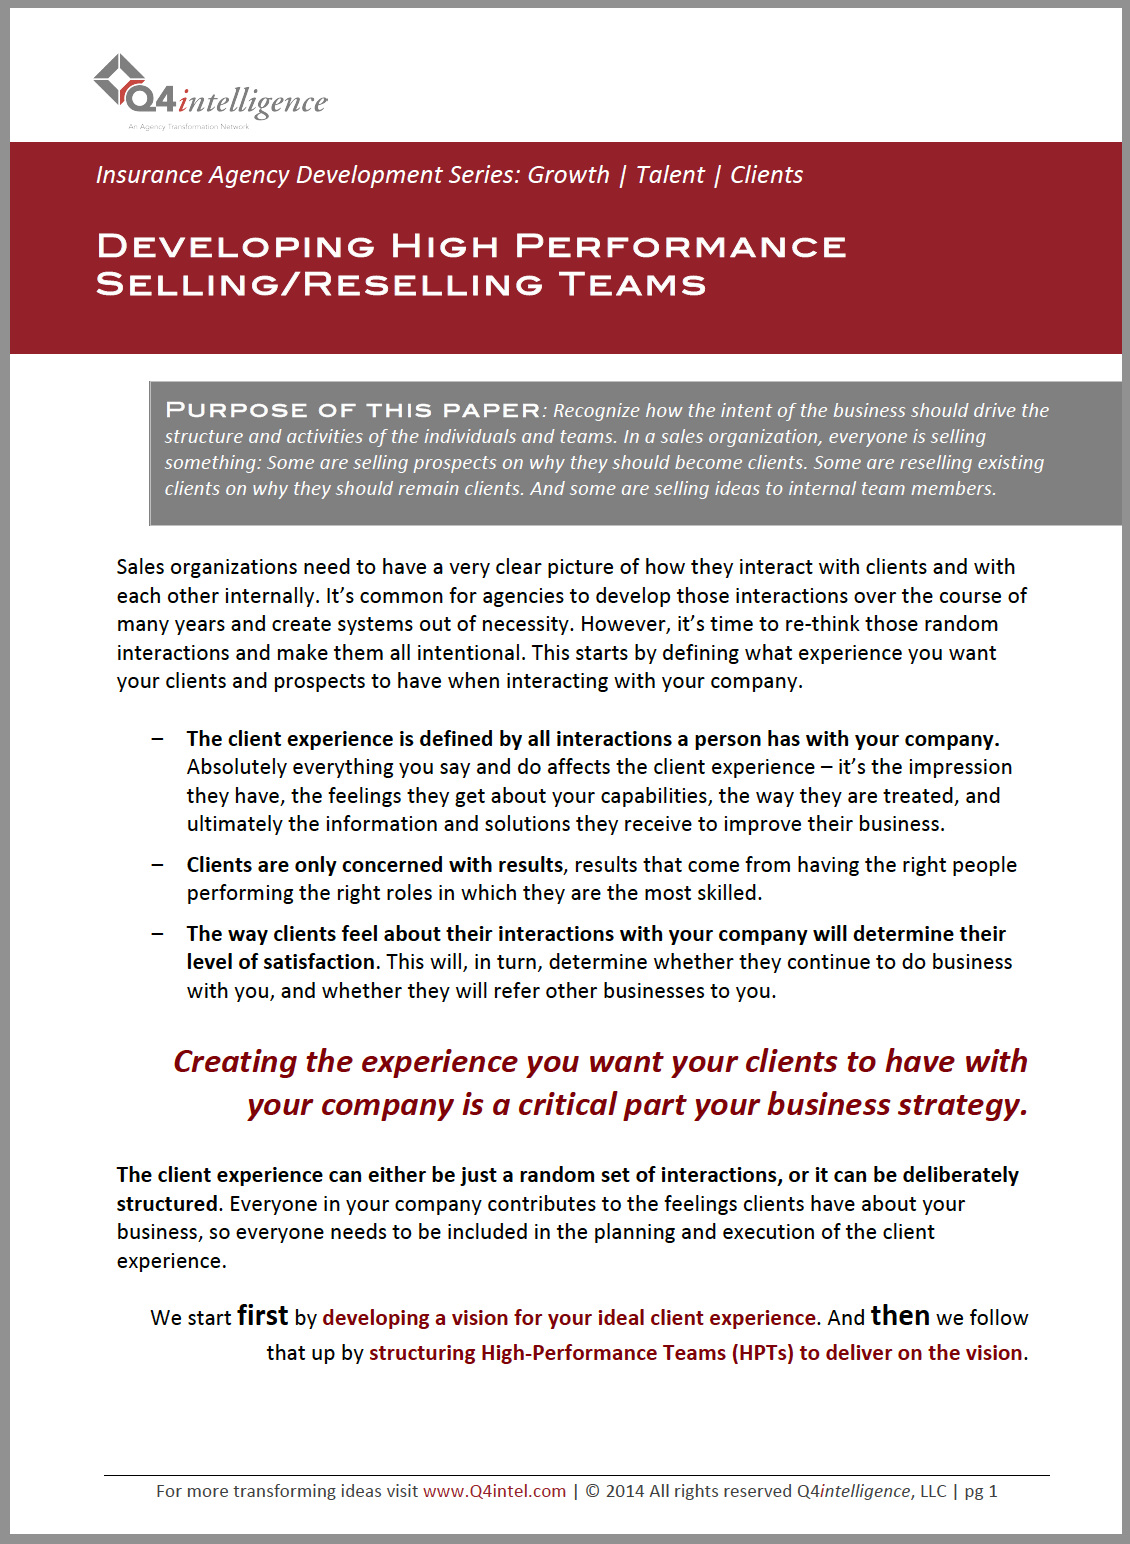 Developing High Performance Teams in your Insurance Agency